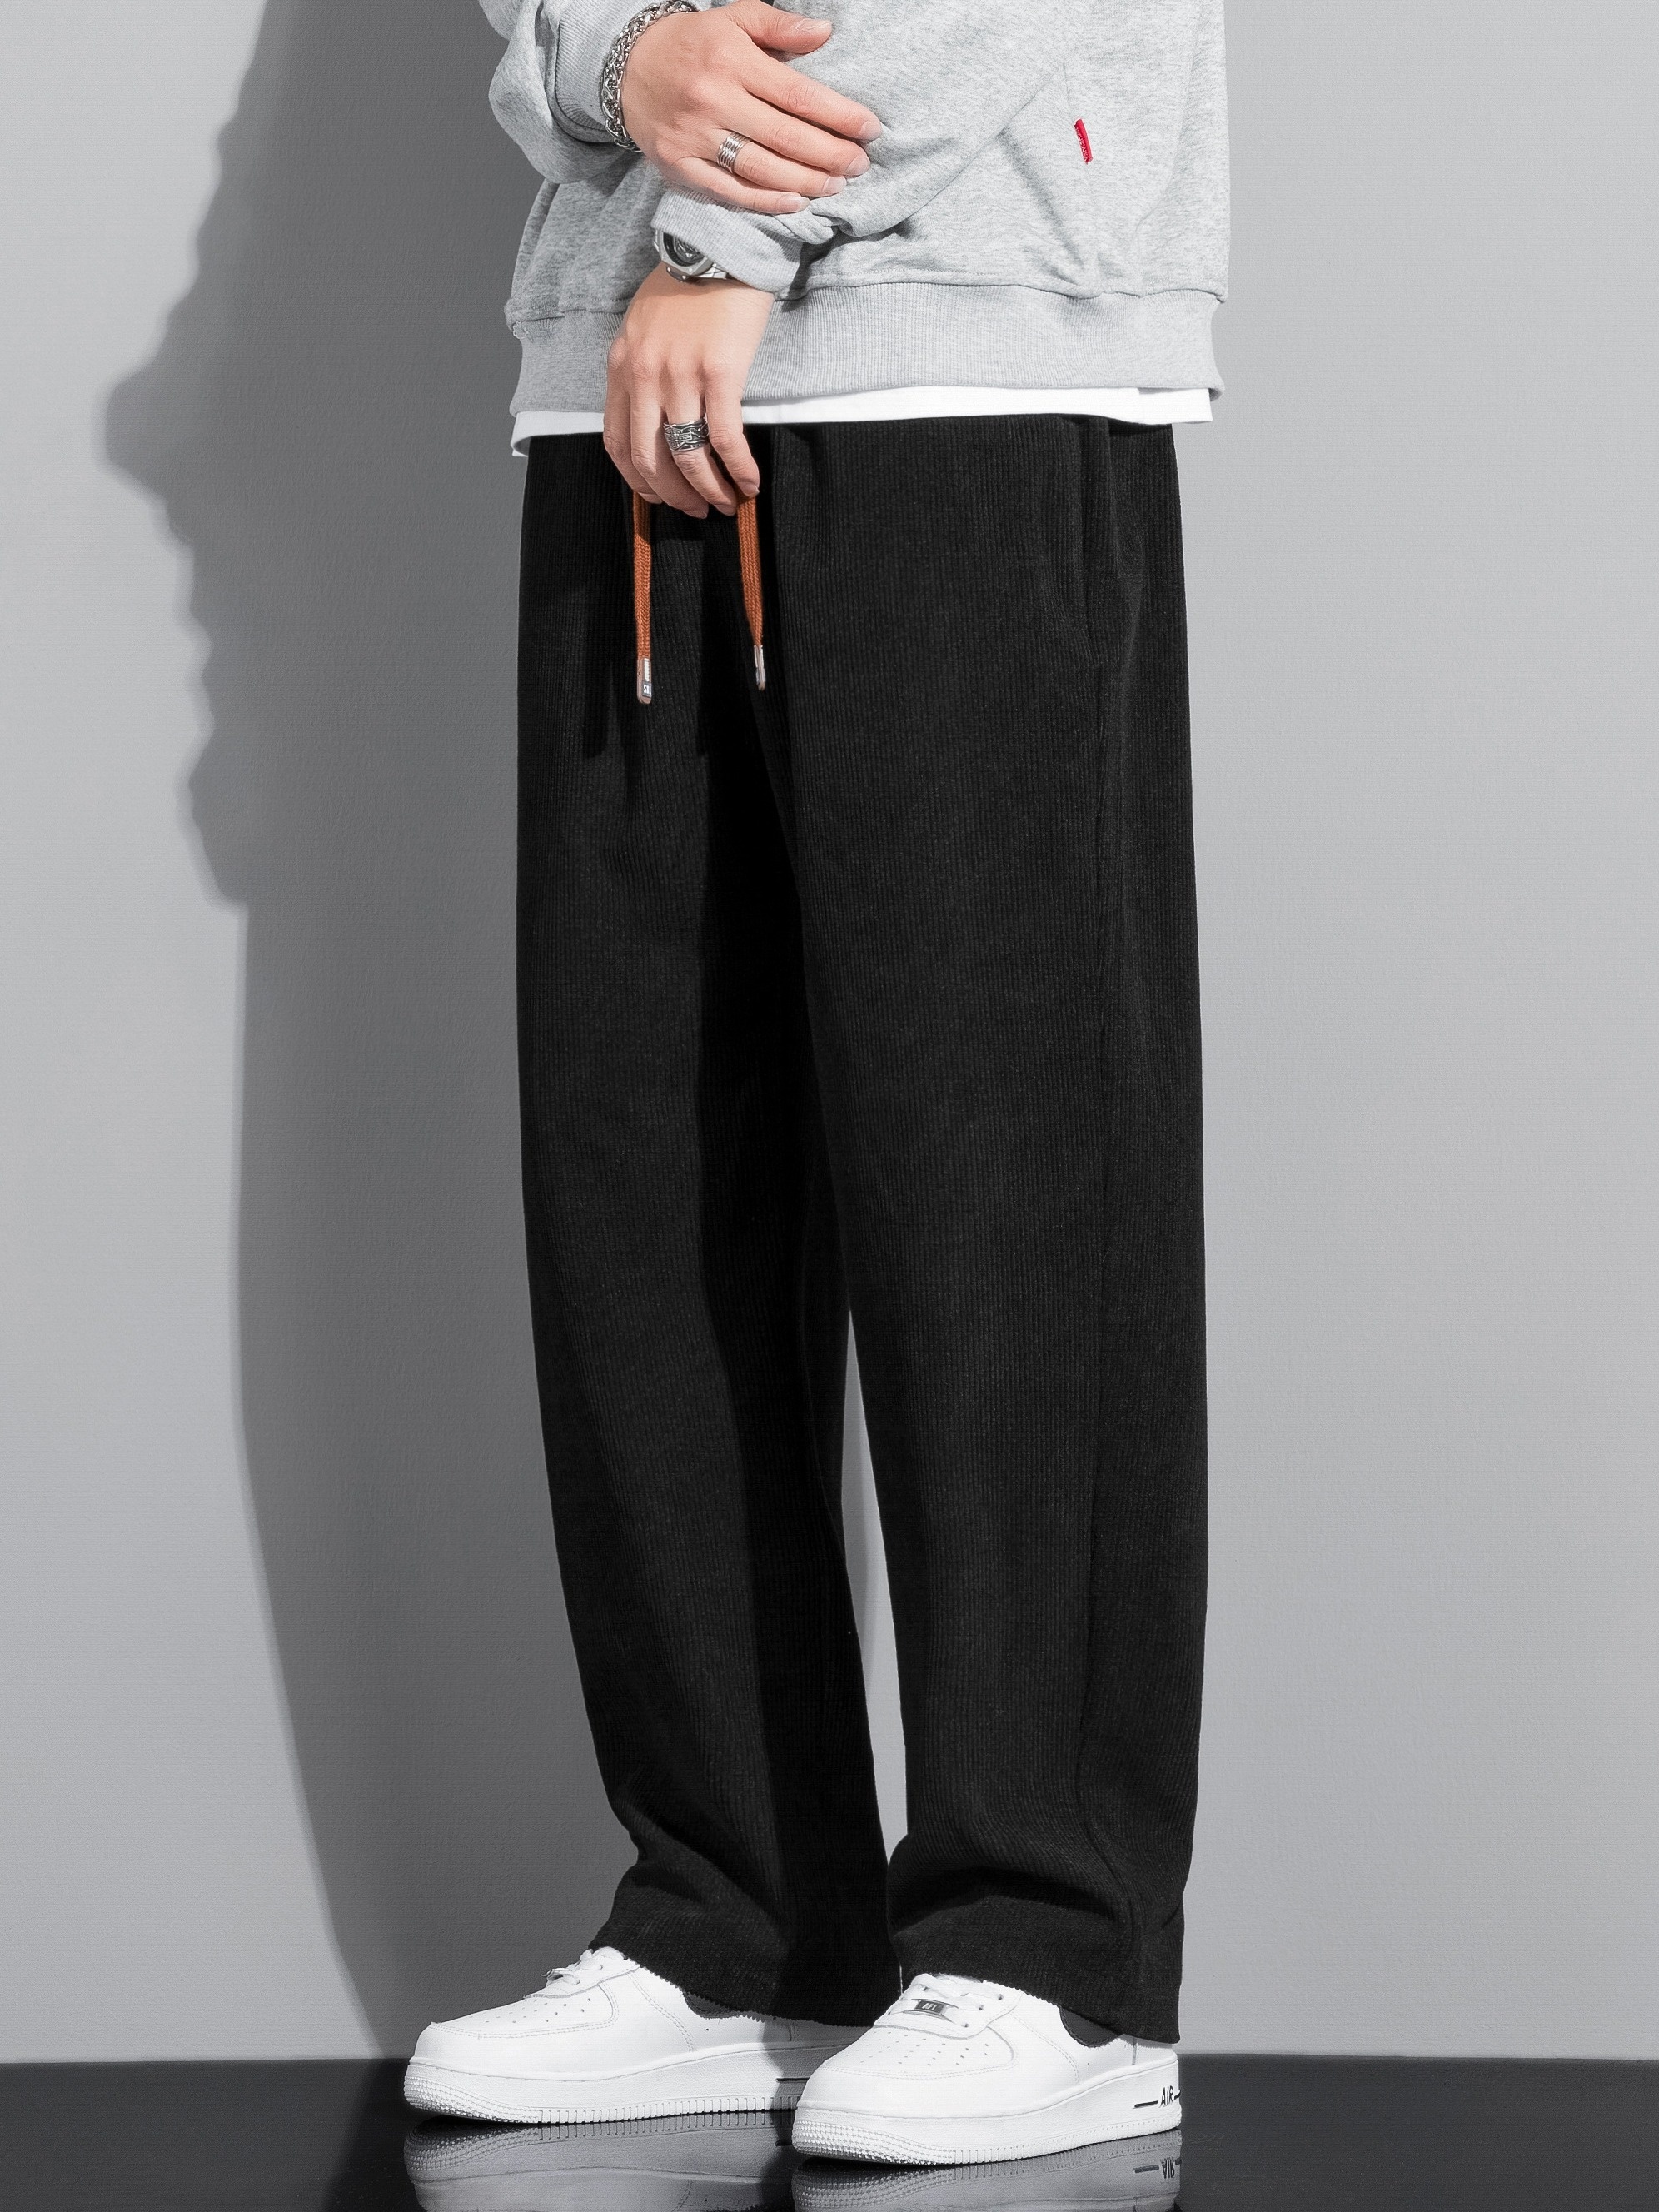 Sweatpants for Men Wide Leg Baggy New Items In Young La Trousers